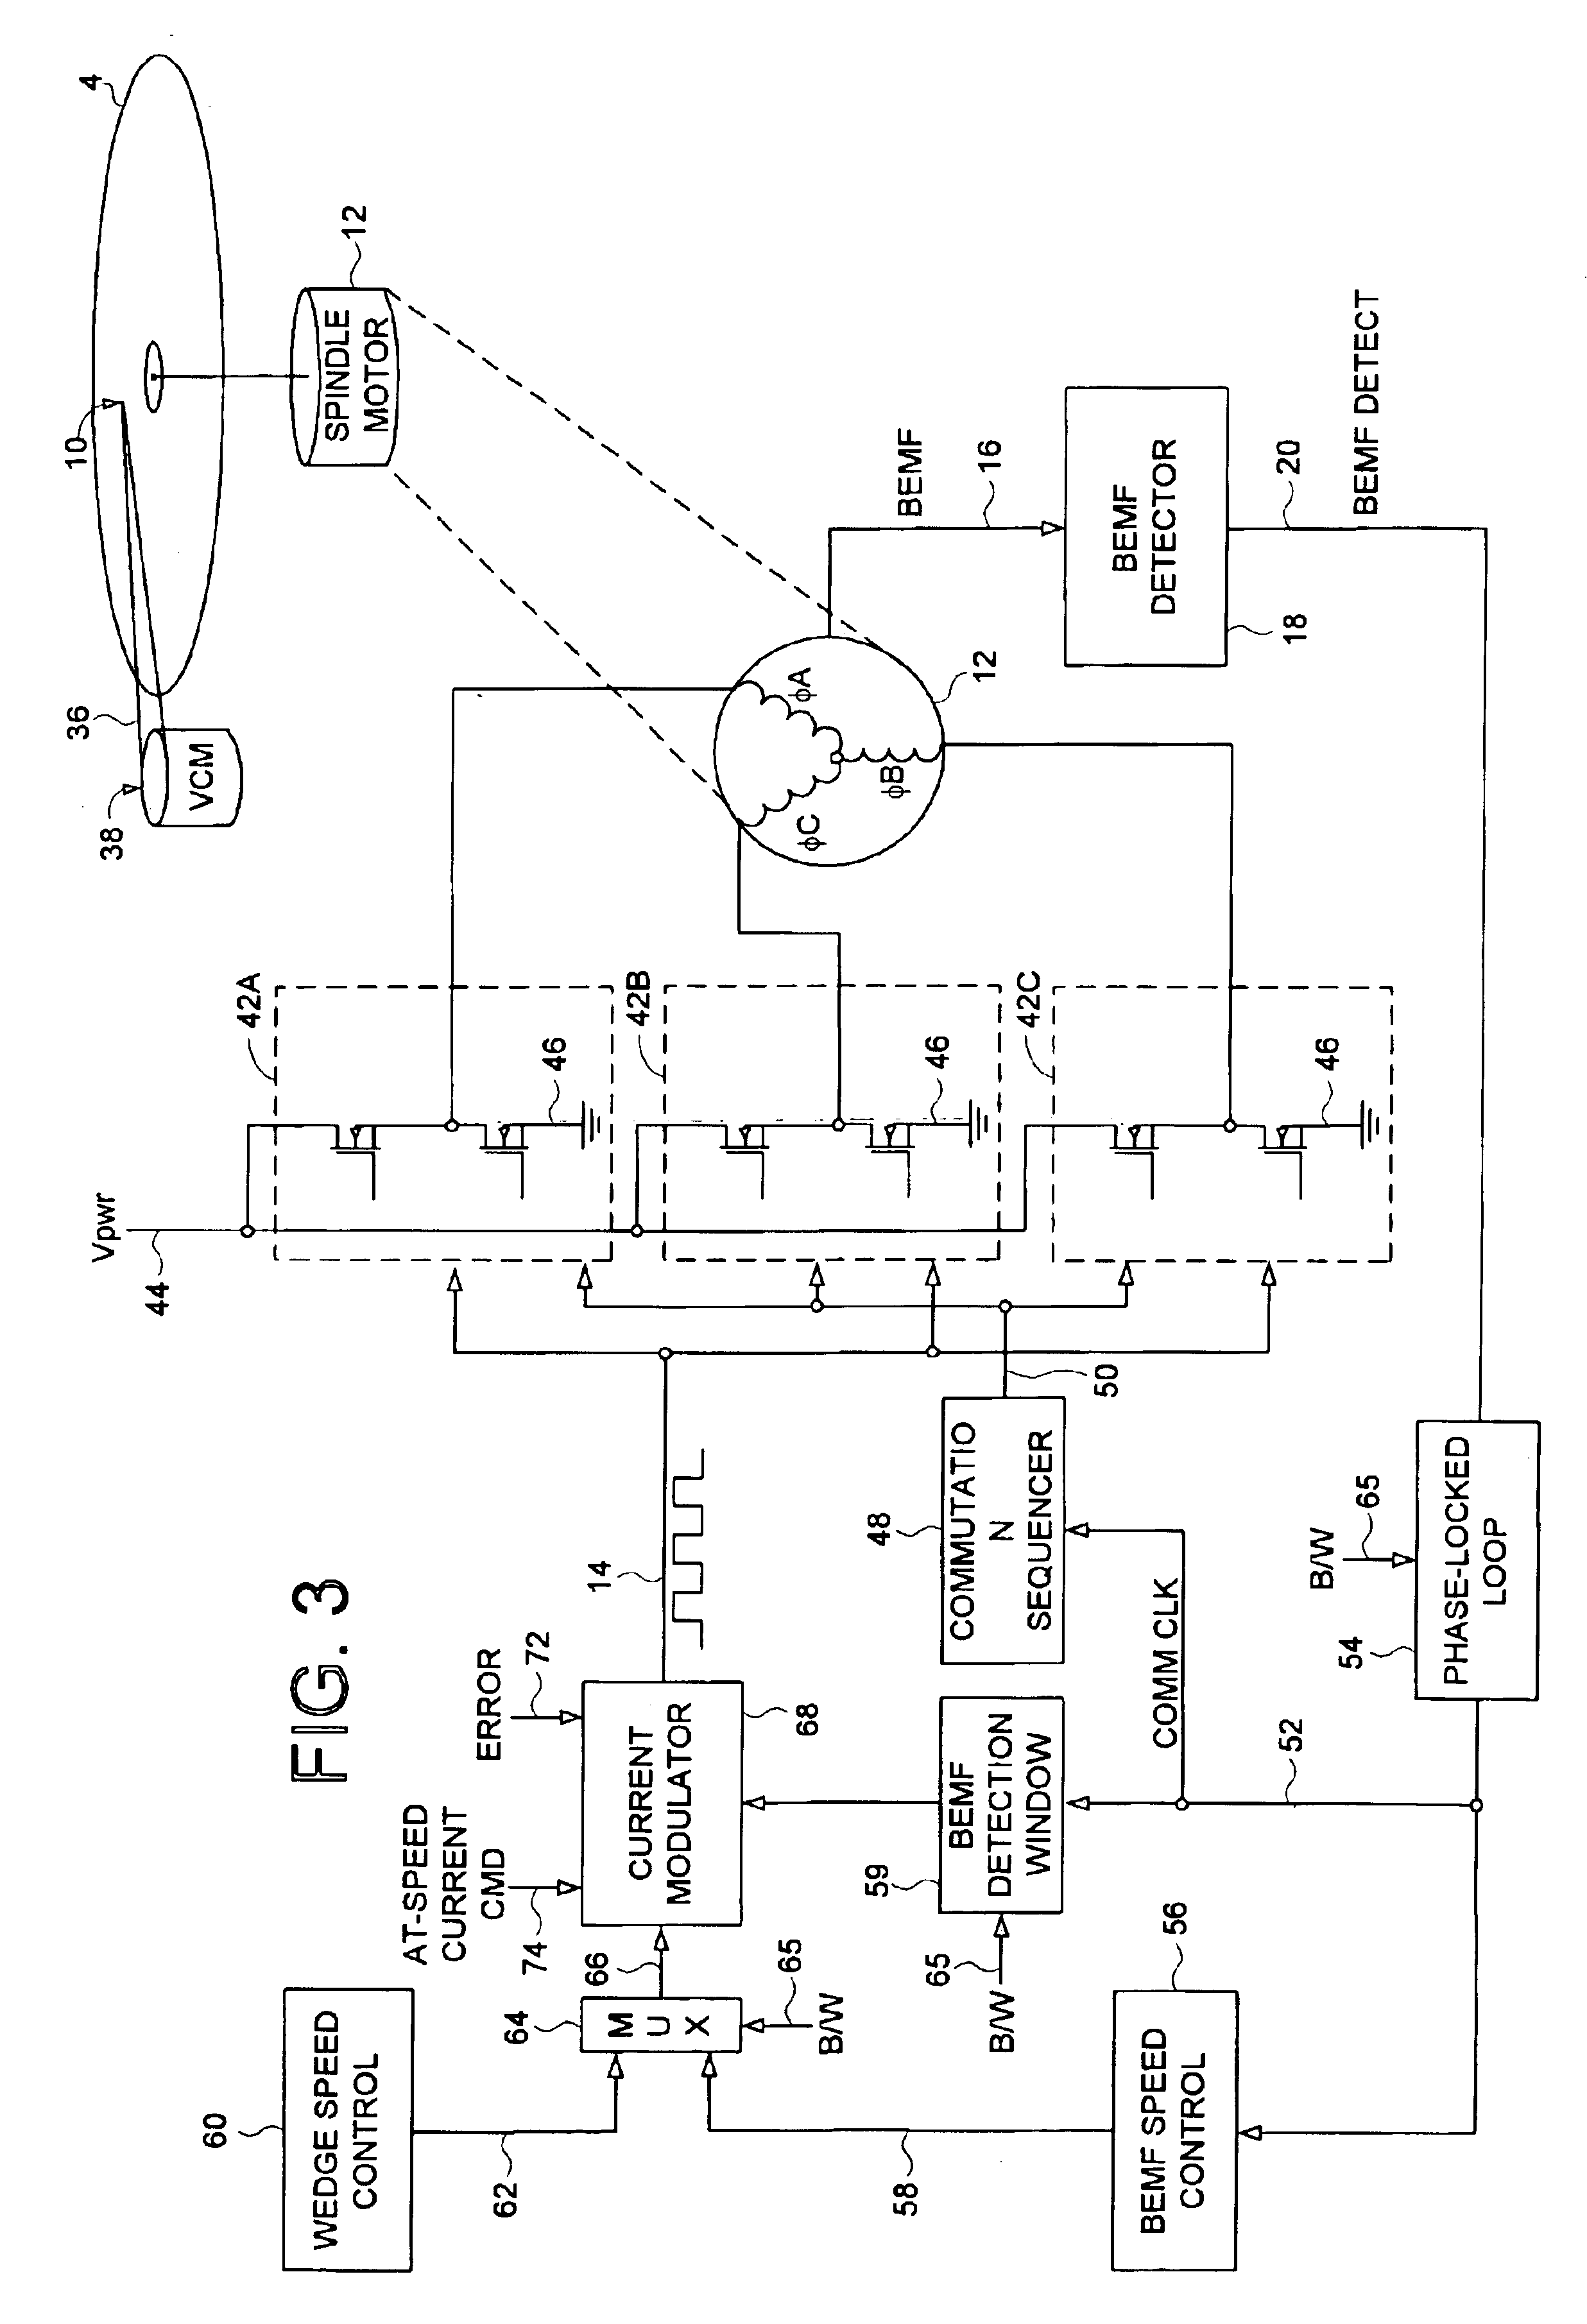 Disk drive employing BEMF spindle speed control or wedge spindle speed control